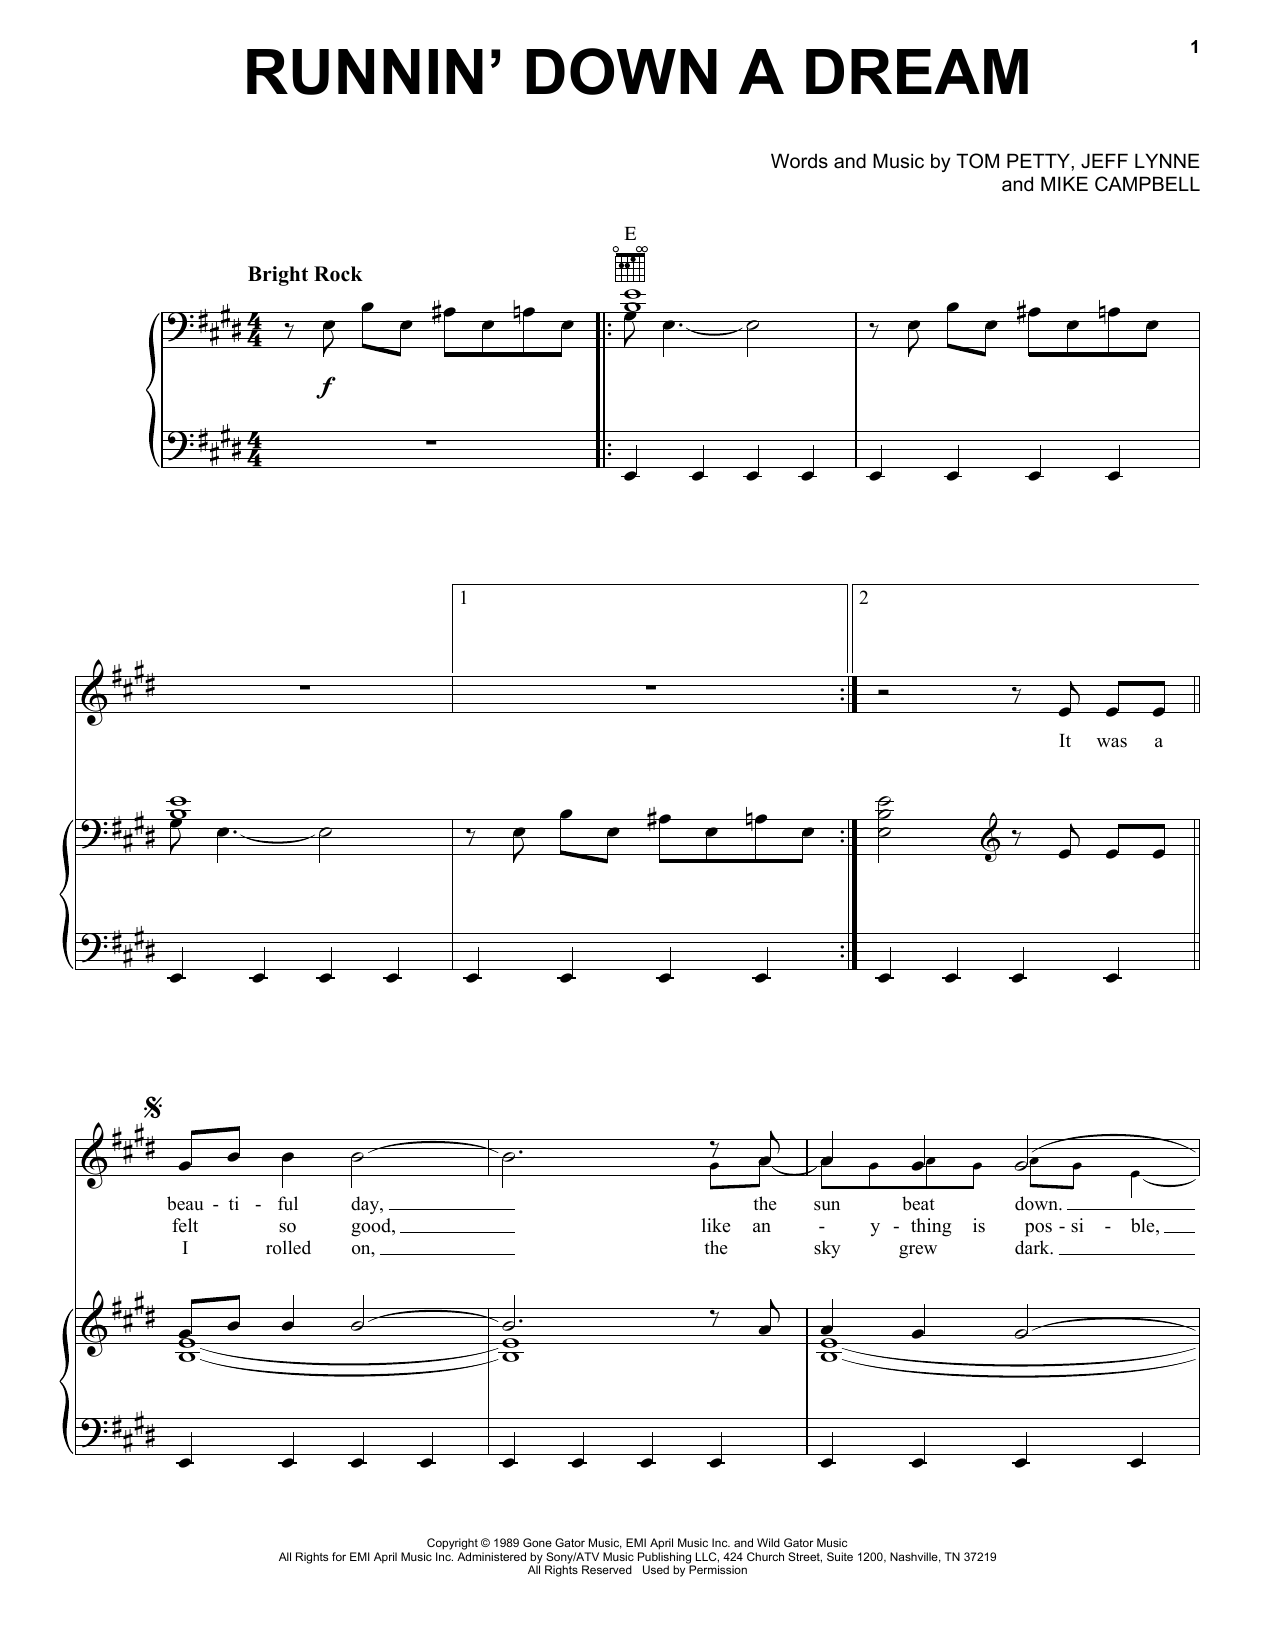 Tom Petty Runnin' Down A Dream sheet music notes and chords. Download Printable PDF.